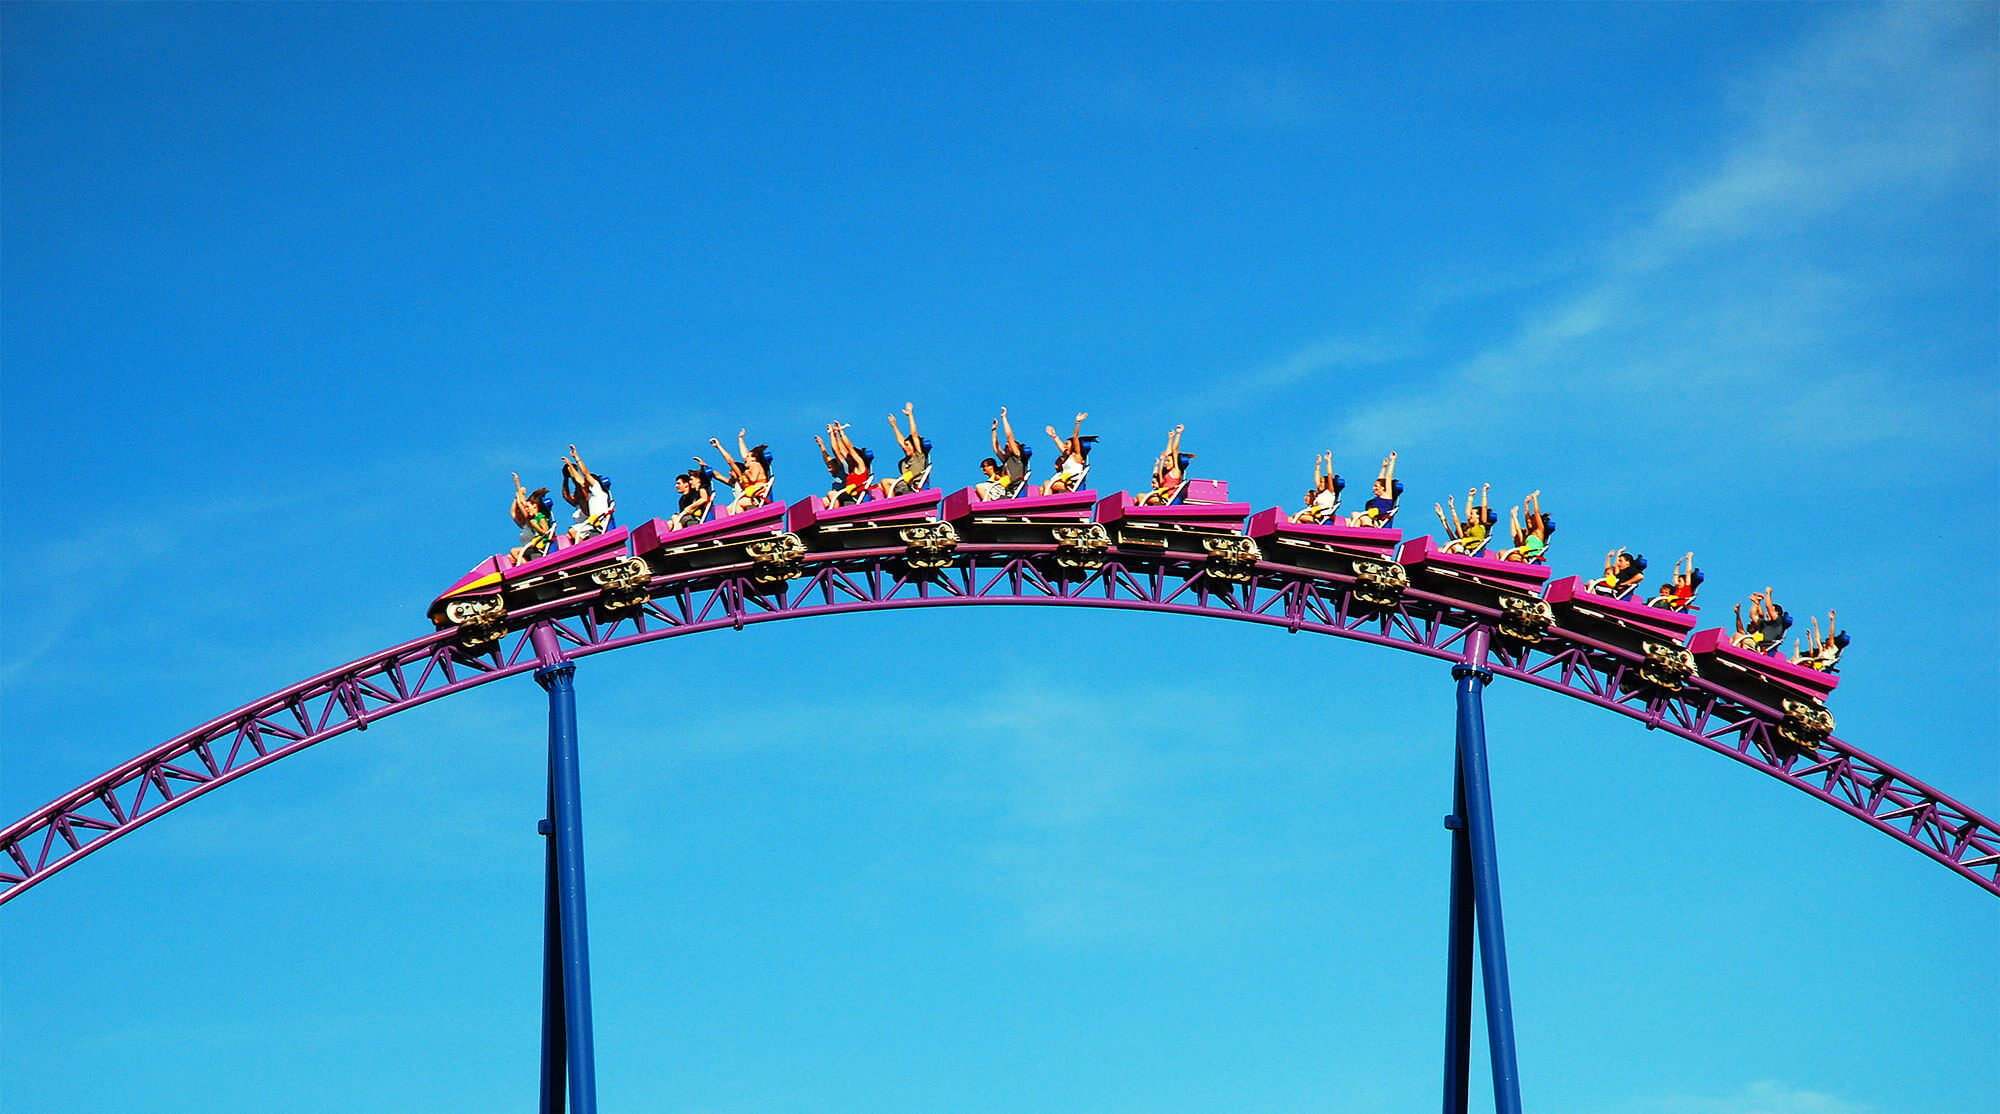 The Best Theme Park in Every State